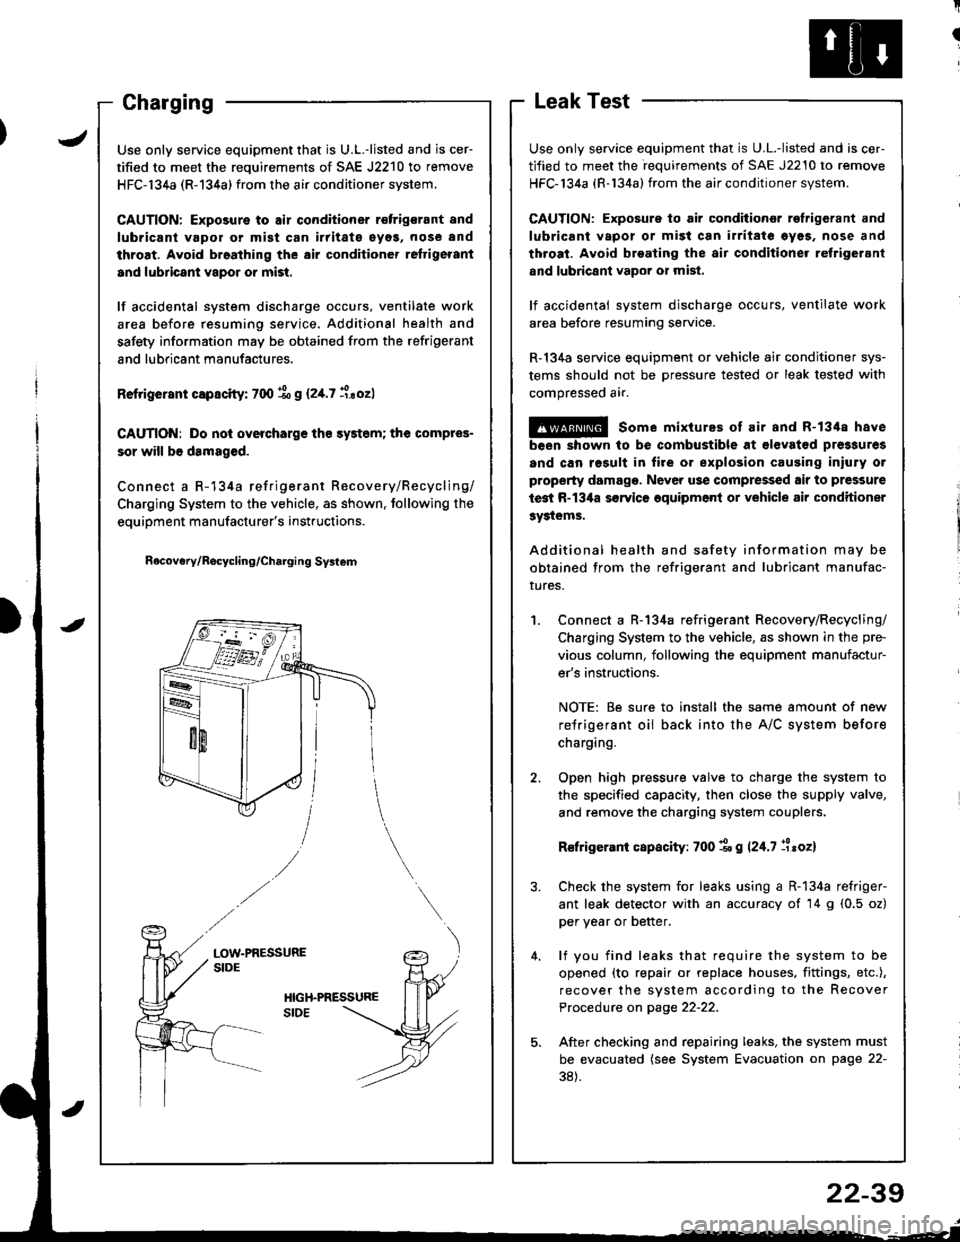 HONDA INTEGRA 1998 4.G User Guide I
I
ChargingLeak Test
Use only service equipment that is U.L.-listed and is cer-
tified to meet the requirements of SAE J2210 to remove
HFC-134a (R-134a) from the air conditioner system.
CAUTION: Expo